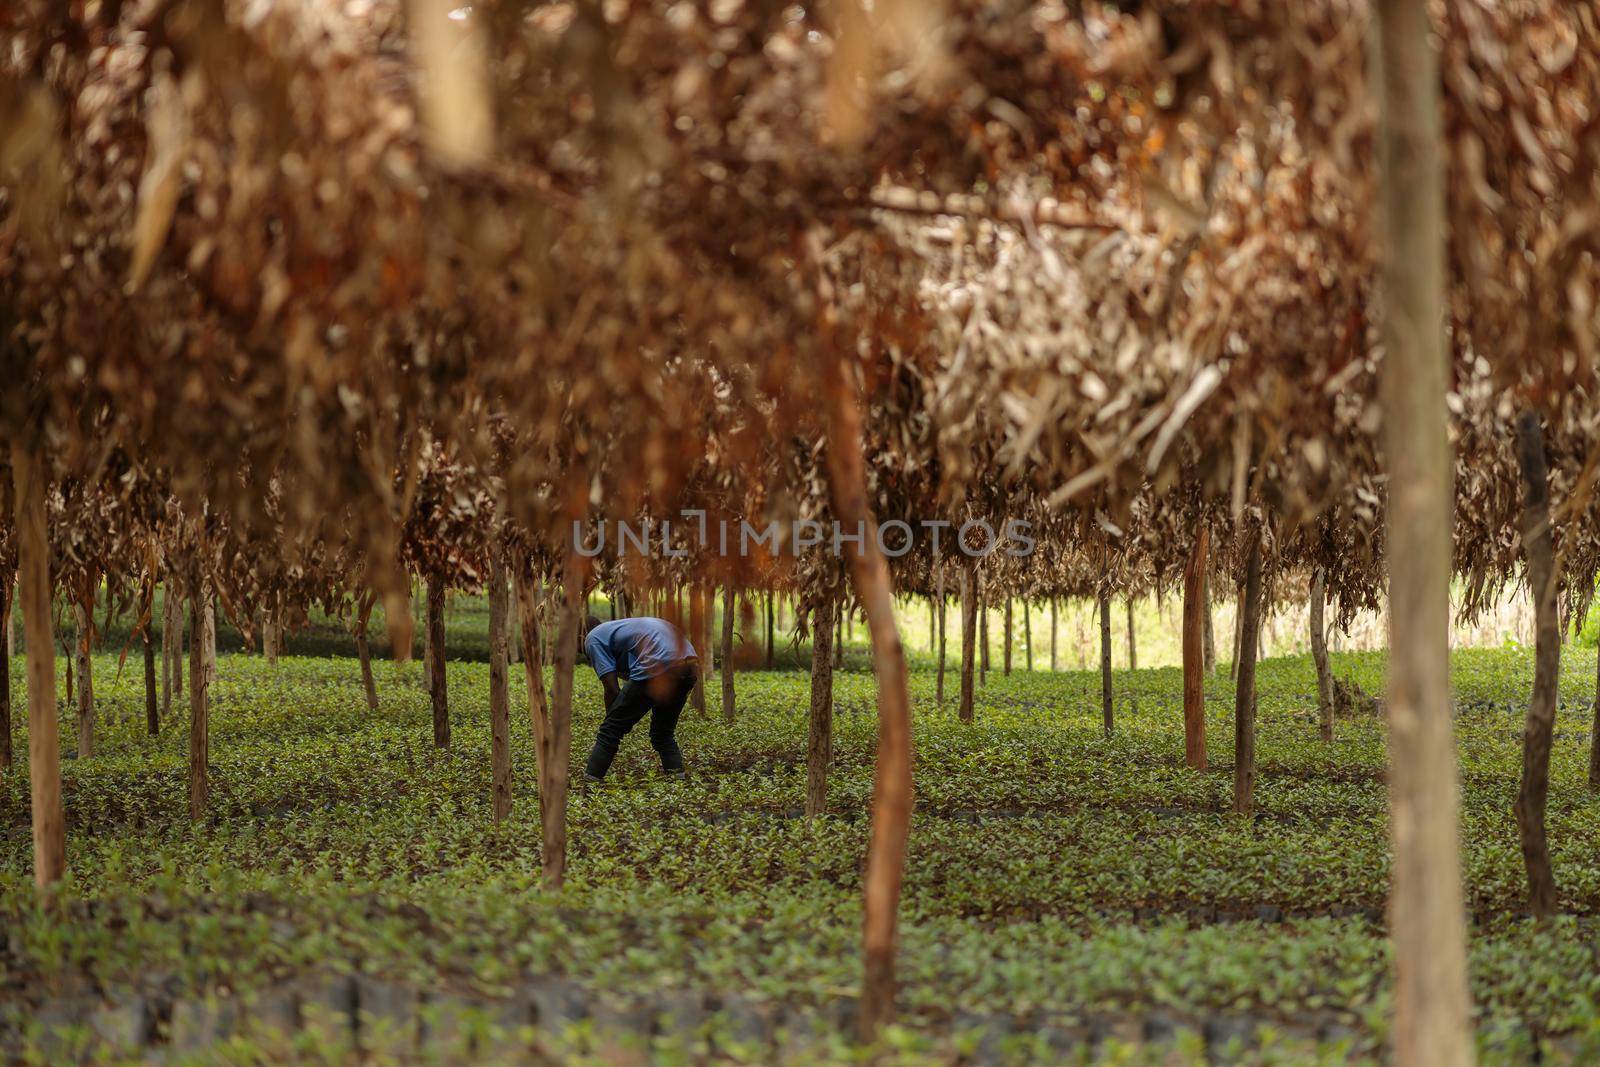 African American worker processing coffee sprouts among trees on a plantation, Rwanda region